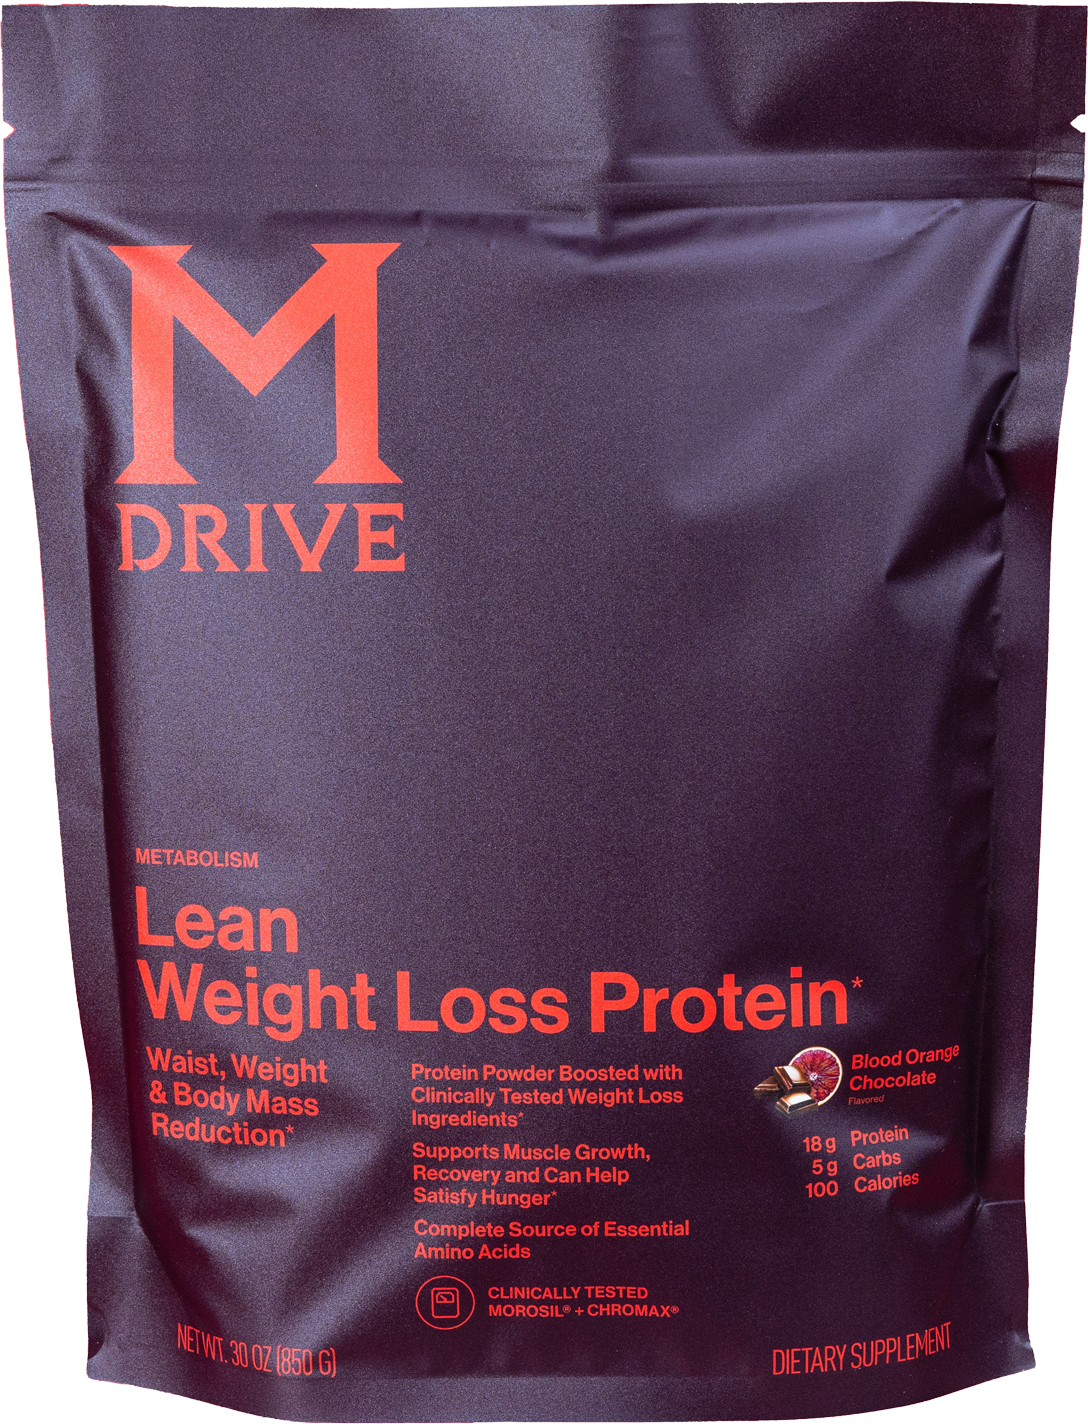 M Drive Lean Weight Loss Protein